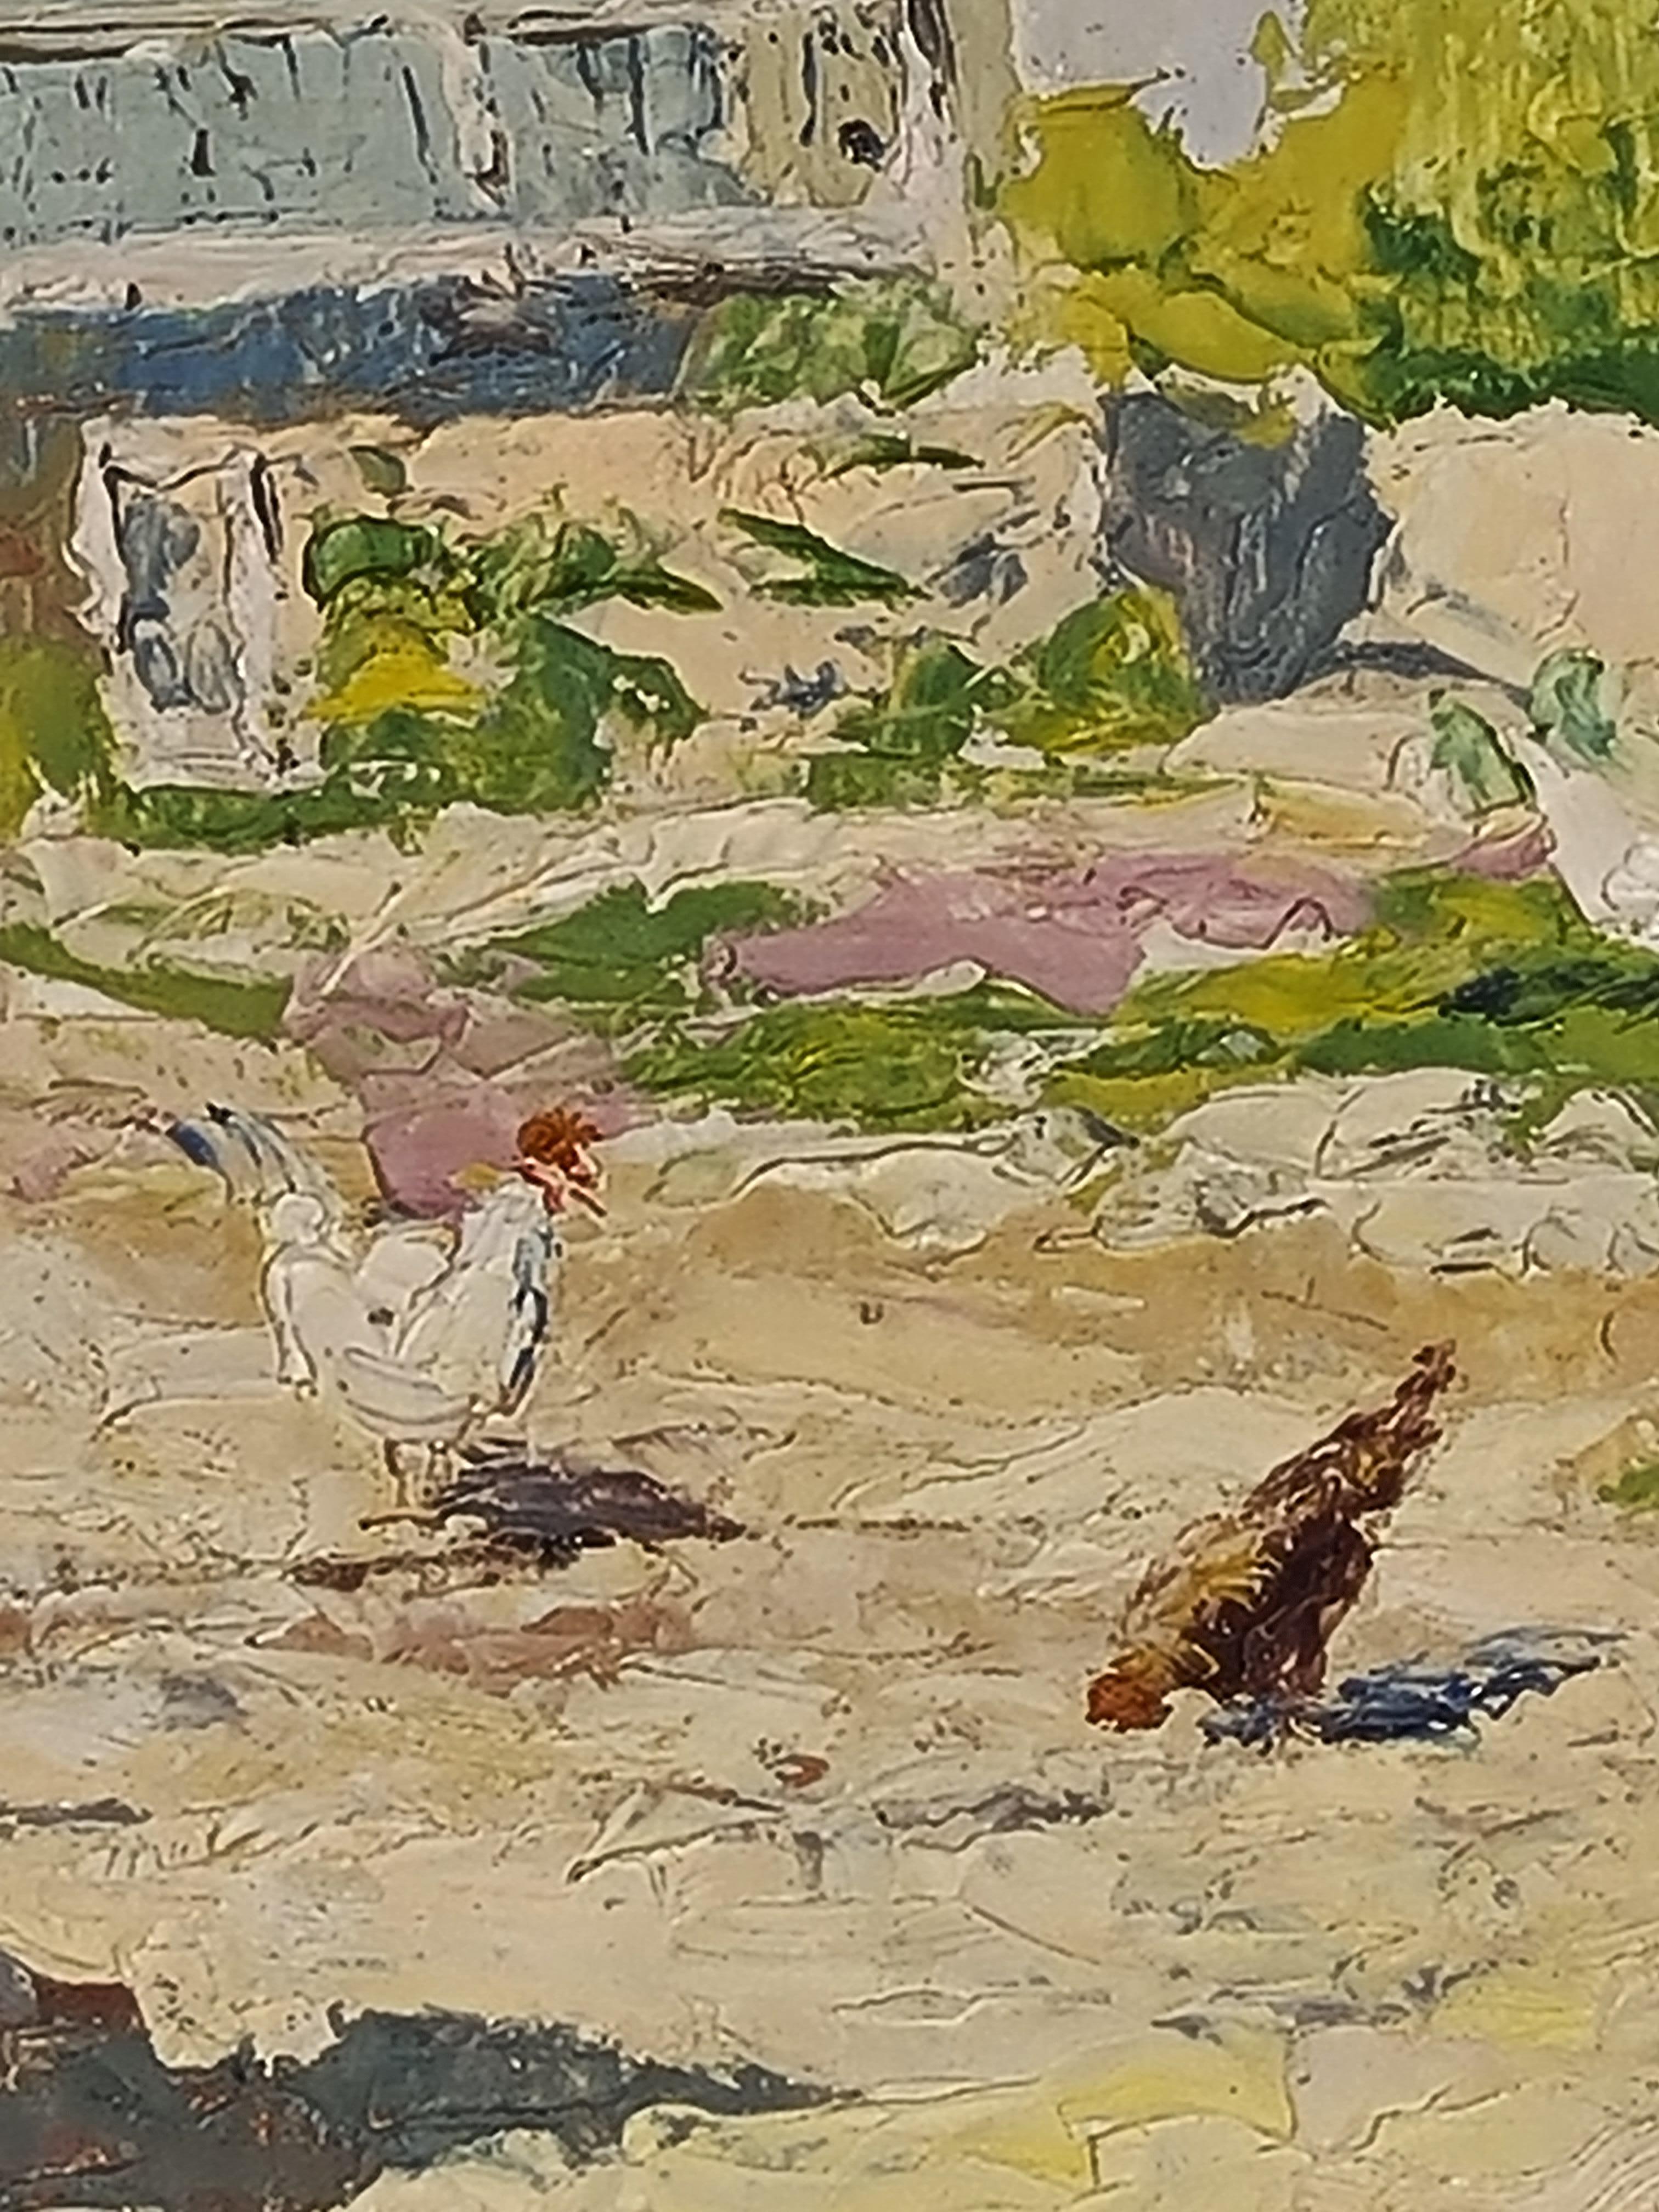 French Mid Century oil on board view of a sunny farmyard with chickens. The painting is signed bottom left but as yet undeciphered. In painted wood frame.

Very charming rural view with characteristic French rural architecture.